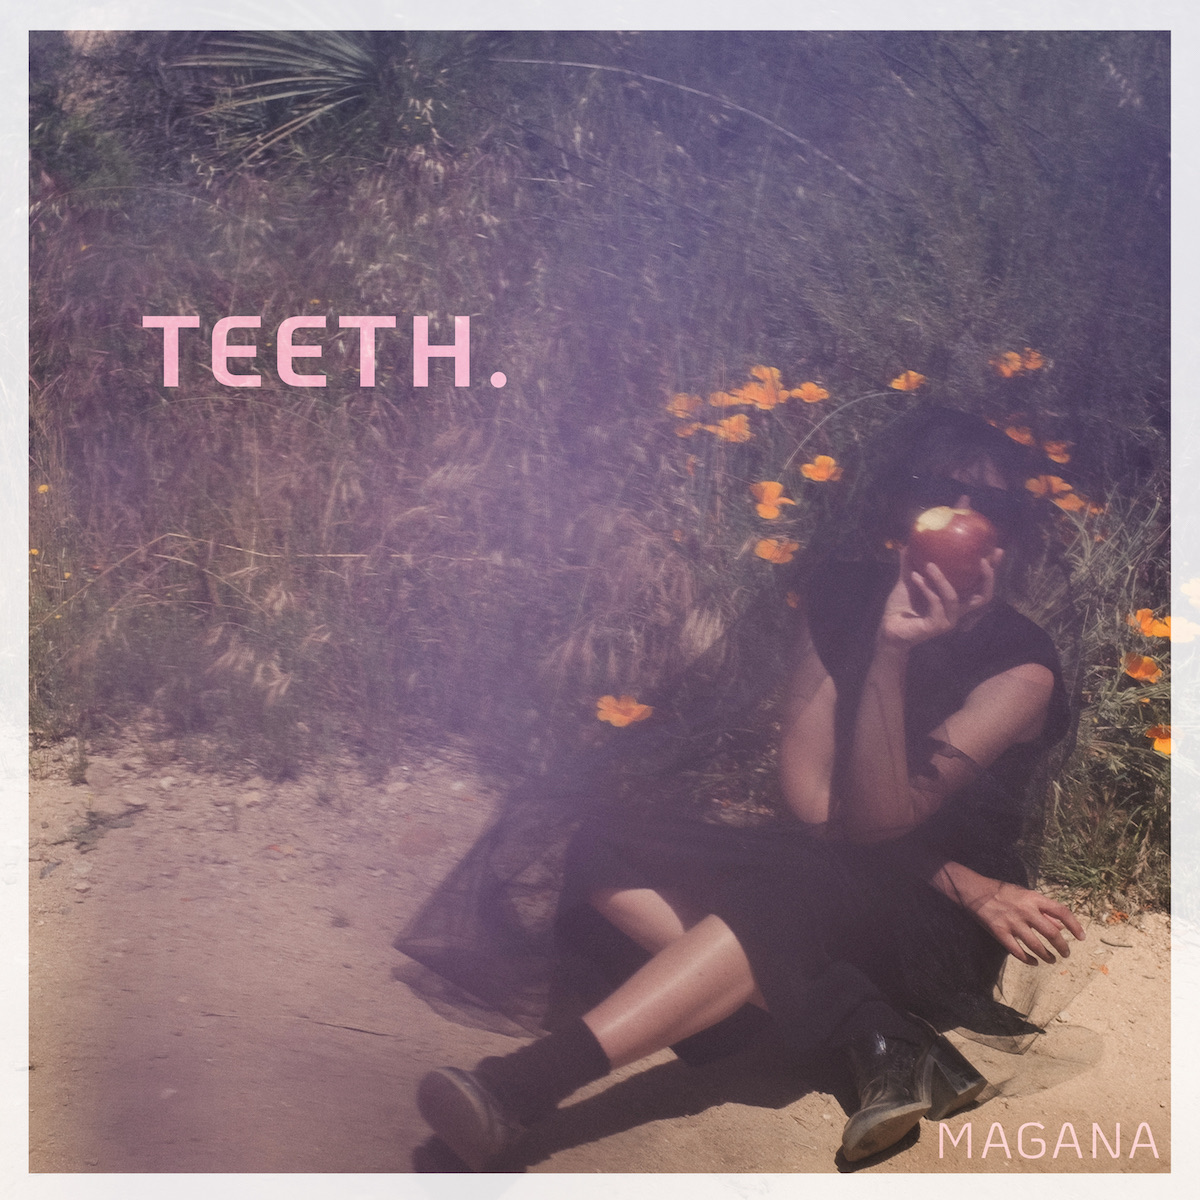 ALBUM REVIEW: Teeth by Magana